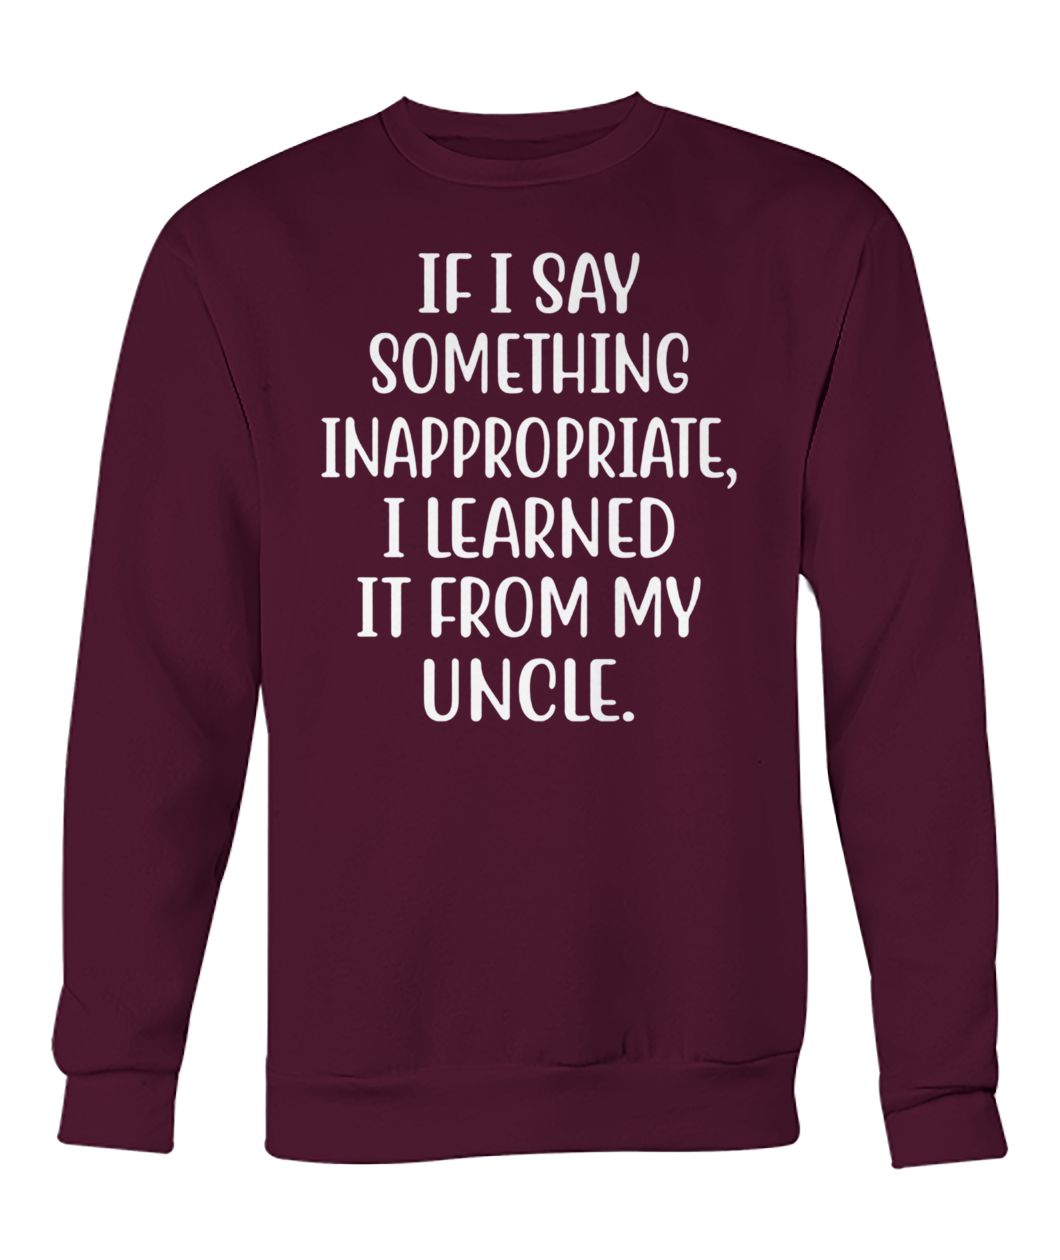 If I say something inappropriate I learned from uncle crew neck sweatshirt